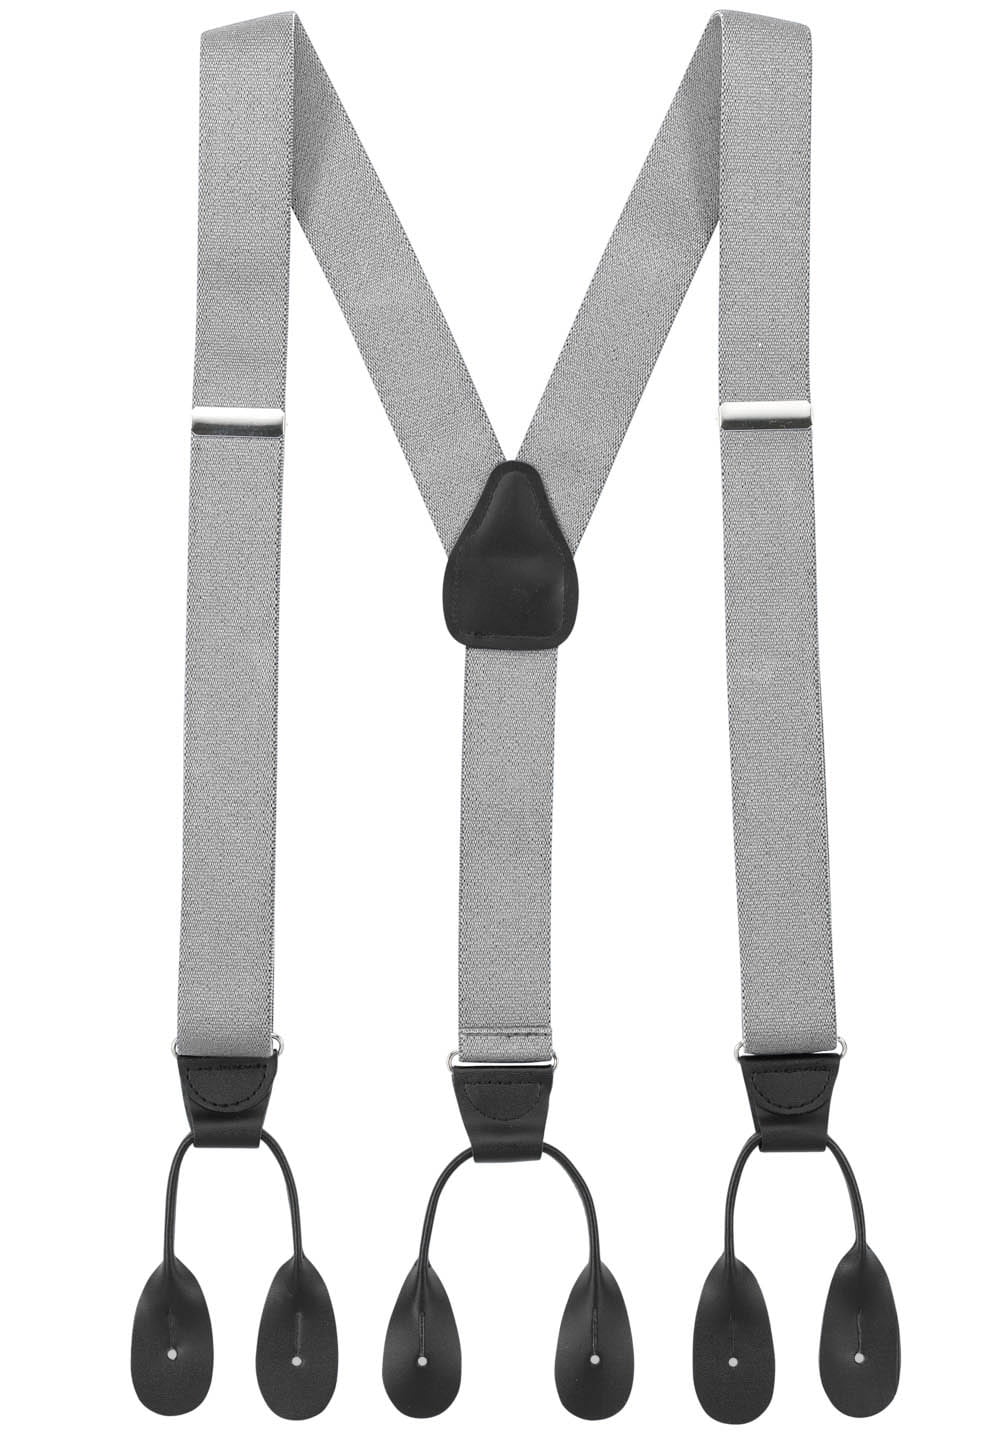 Tall - 54 Black HoldEm Suspender for Men Made in USA Y-Back Leather Crosspatch Clip on tuxedo suspenders